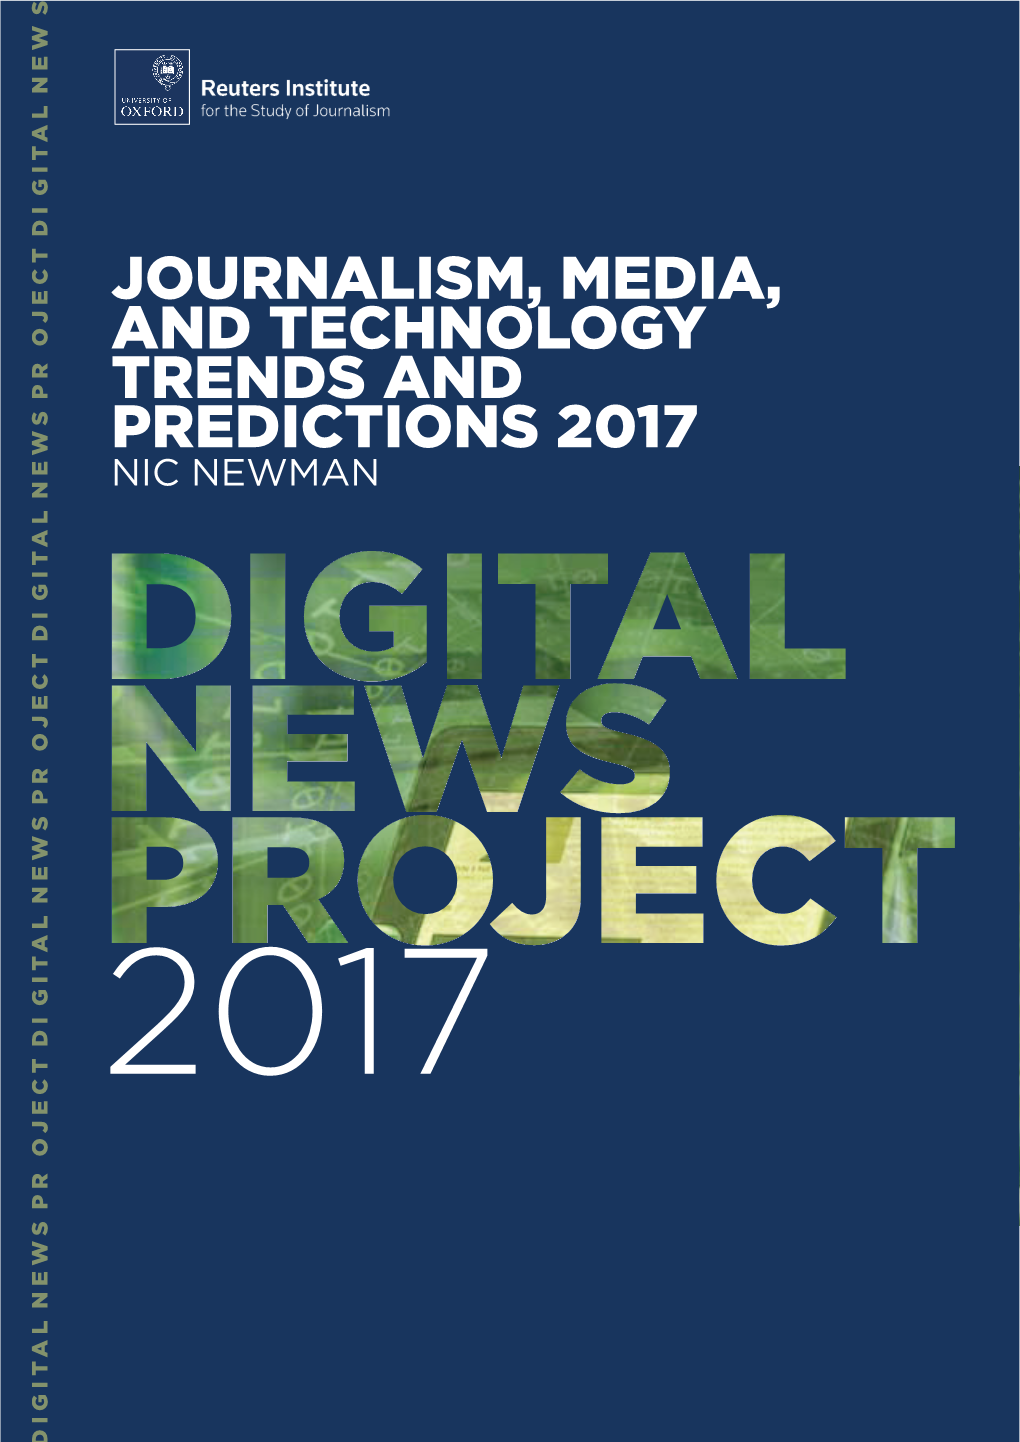 Journalism, Media, and Technology Trends and Predictions 2017